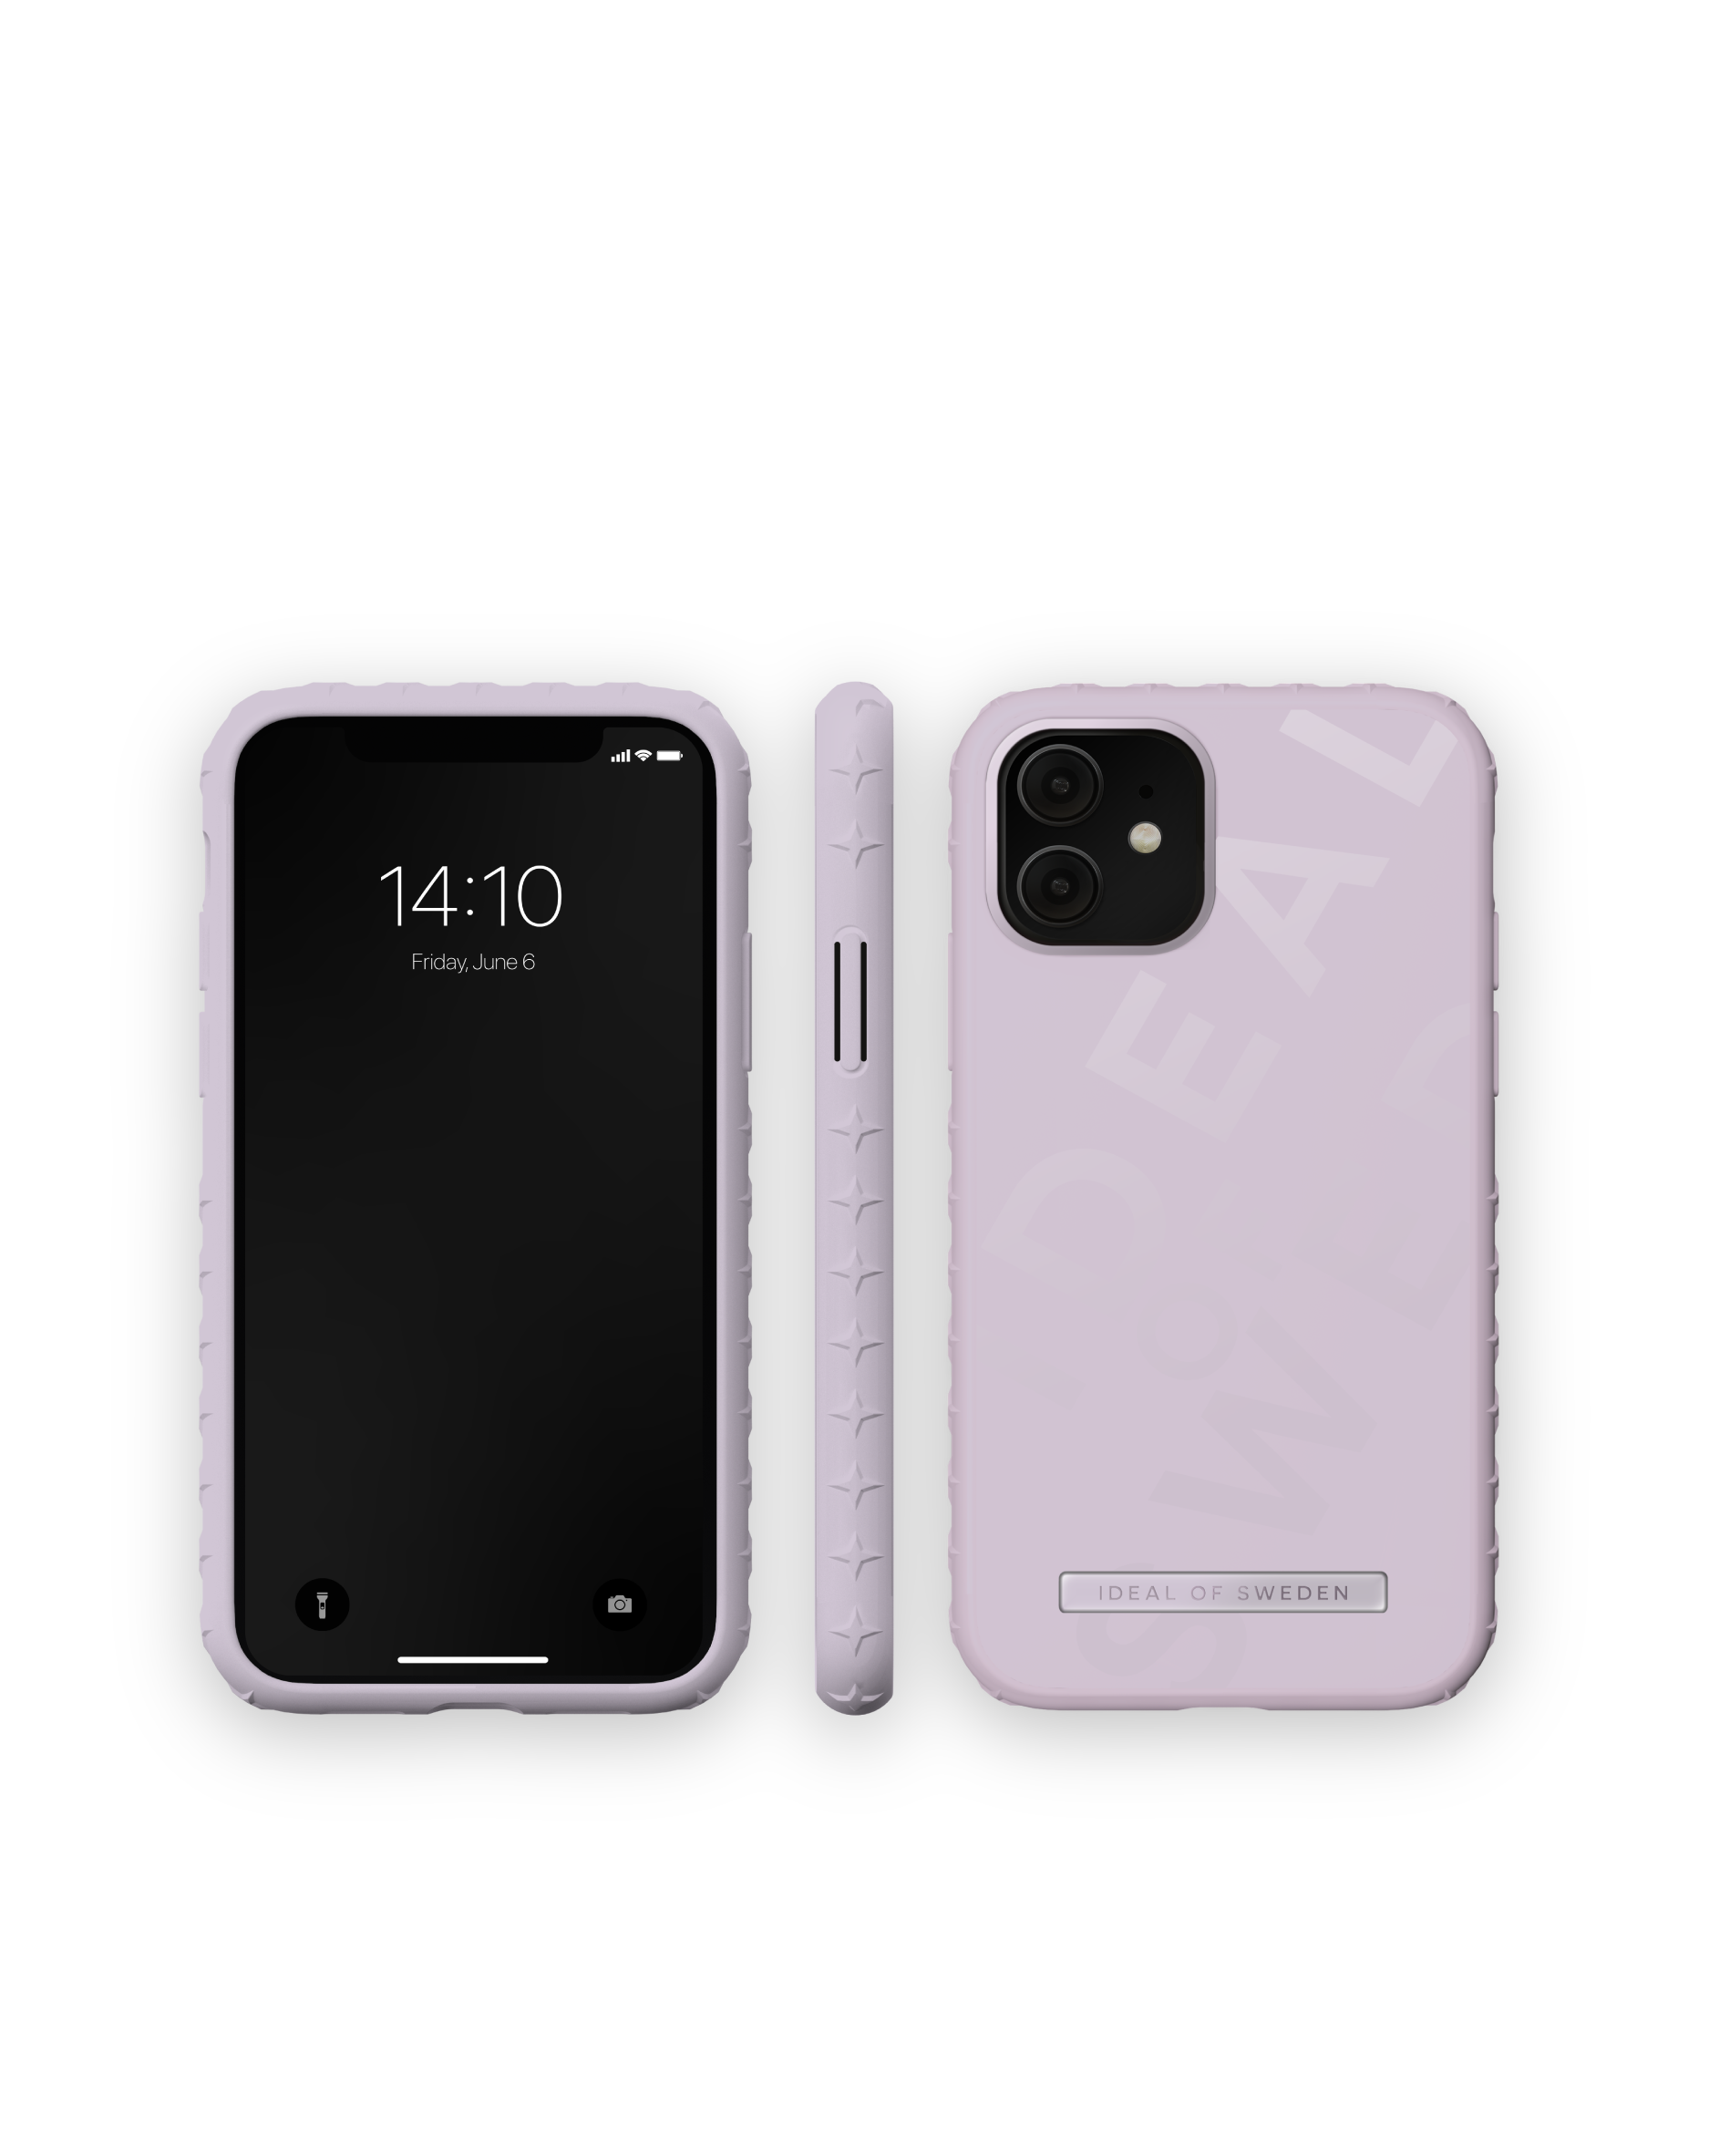 OF iPhone Backcover, / iPhone IDEAL Lavender Force IDACAS22-I1961-382, SWEDEN XR, Apple, 11